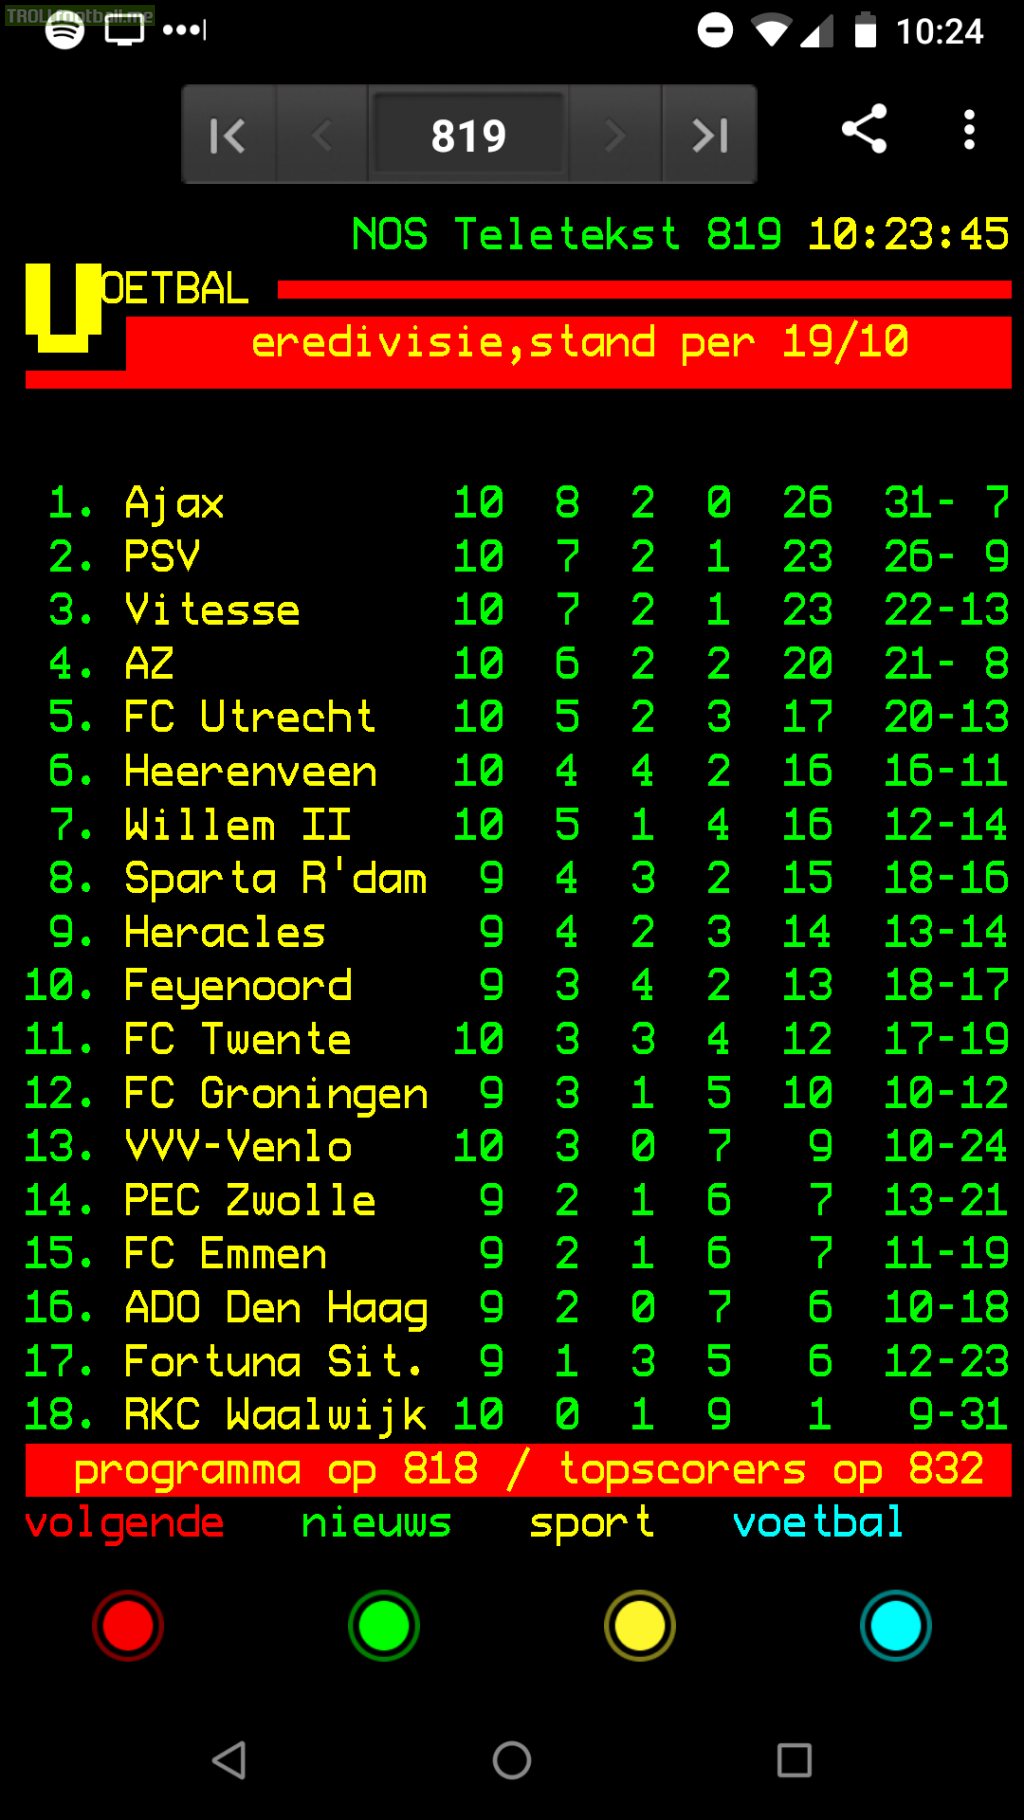 RKC have now officially had the worst Eredivisie start of the season ever with only 1 point out of their first 10 games and a goal difference of -22